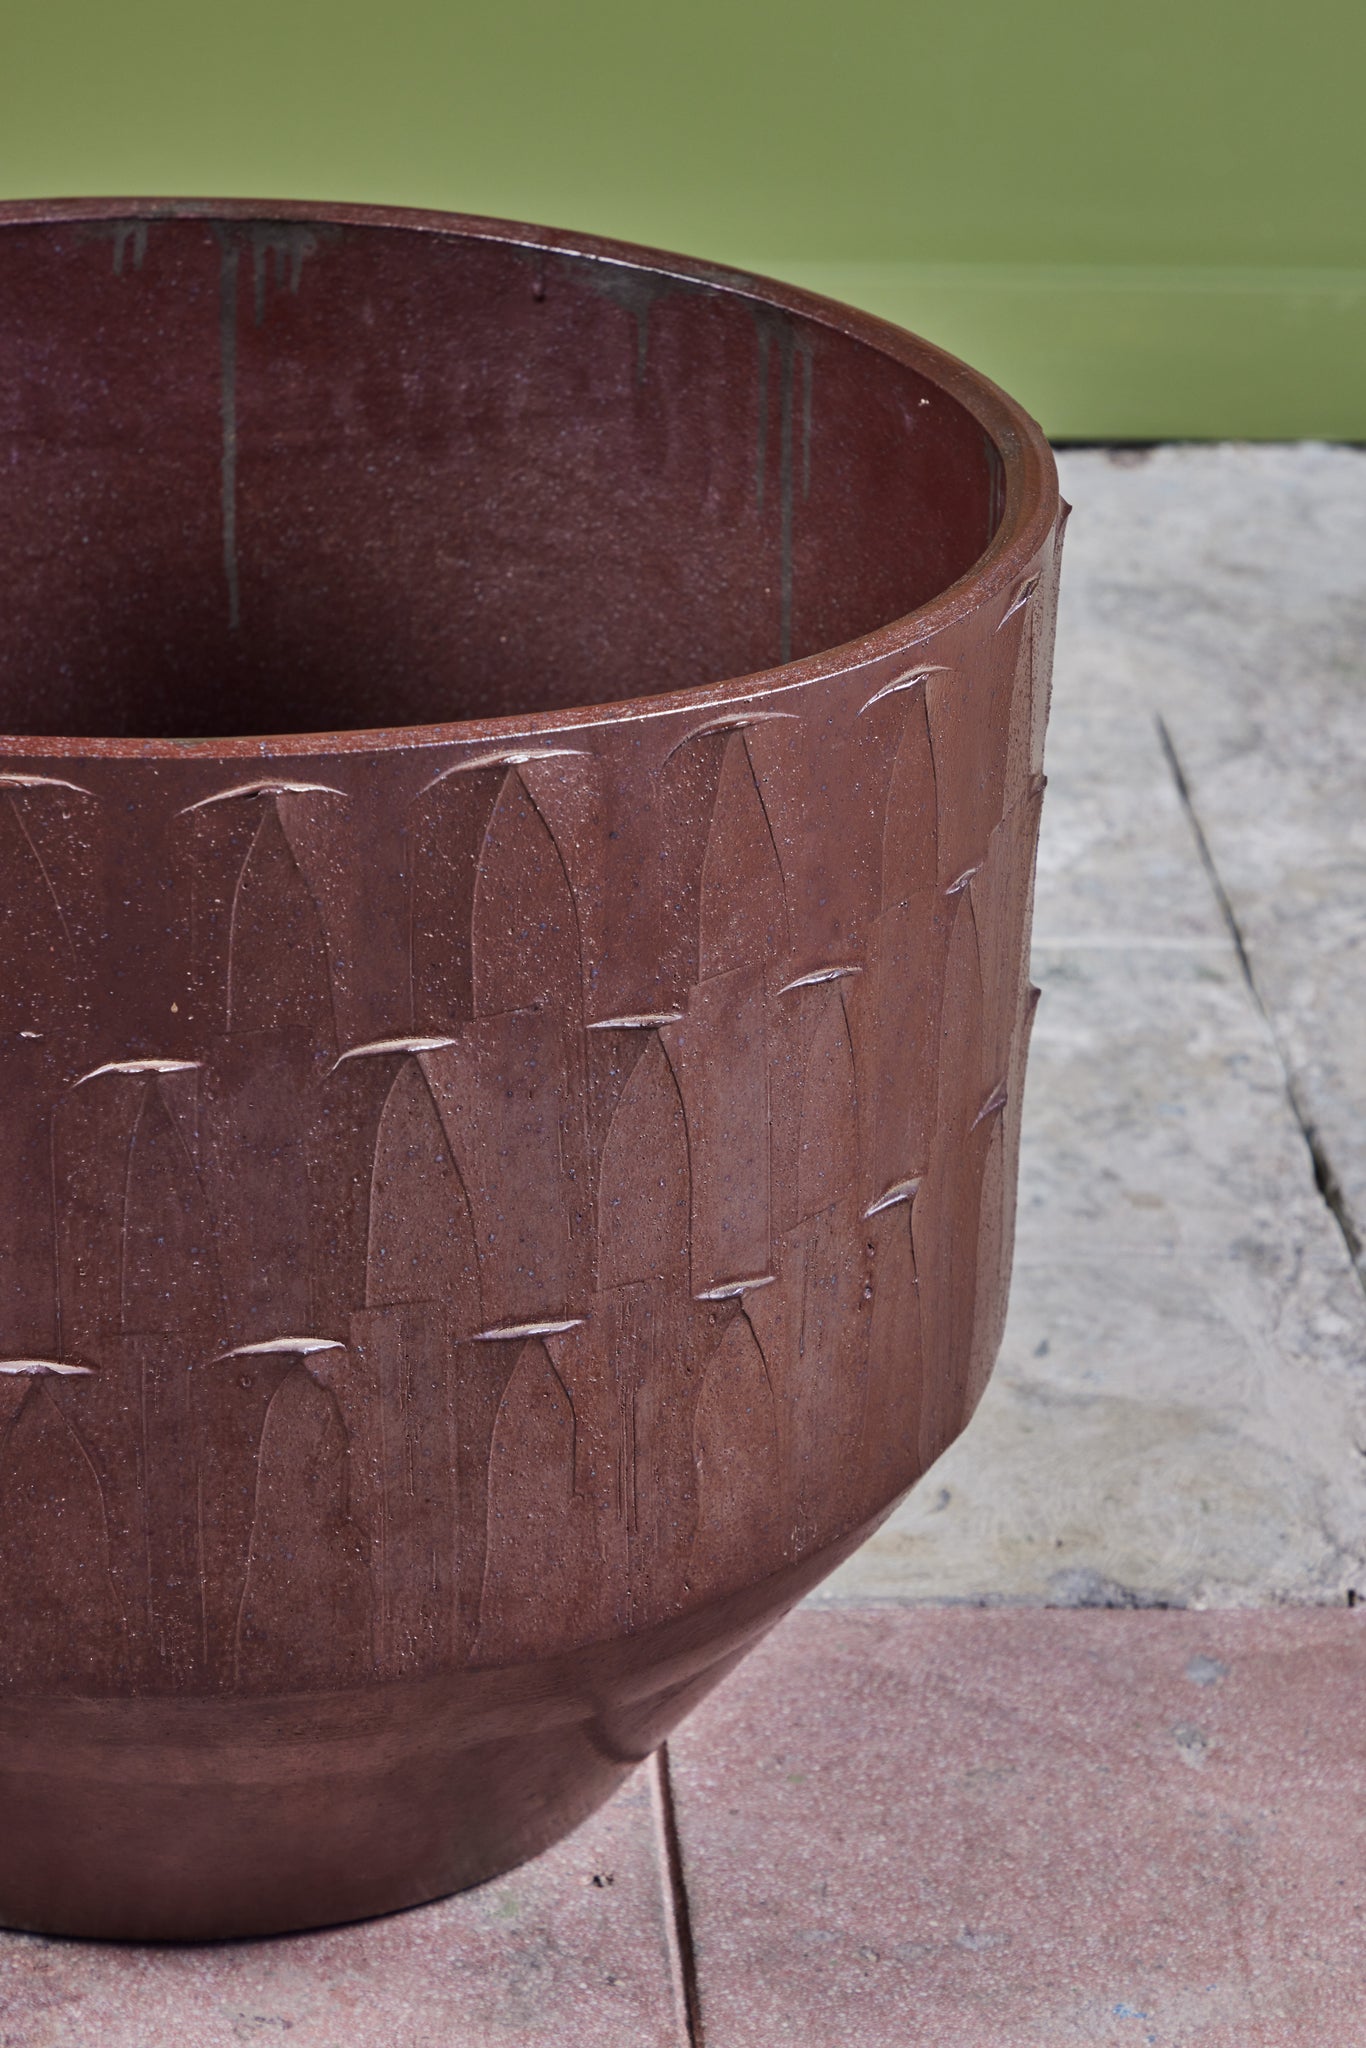 David Cressey Ribbed Plum Glazed Pro/Artisan Planter for Architectural Pottery